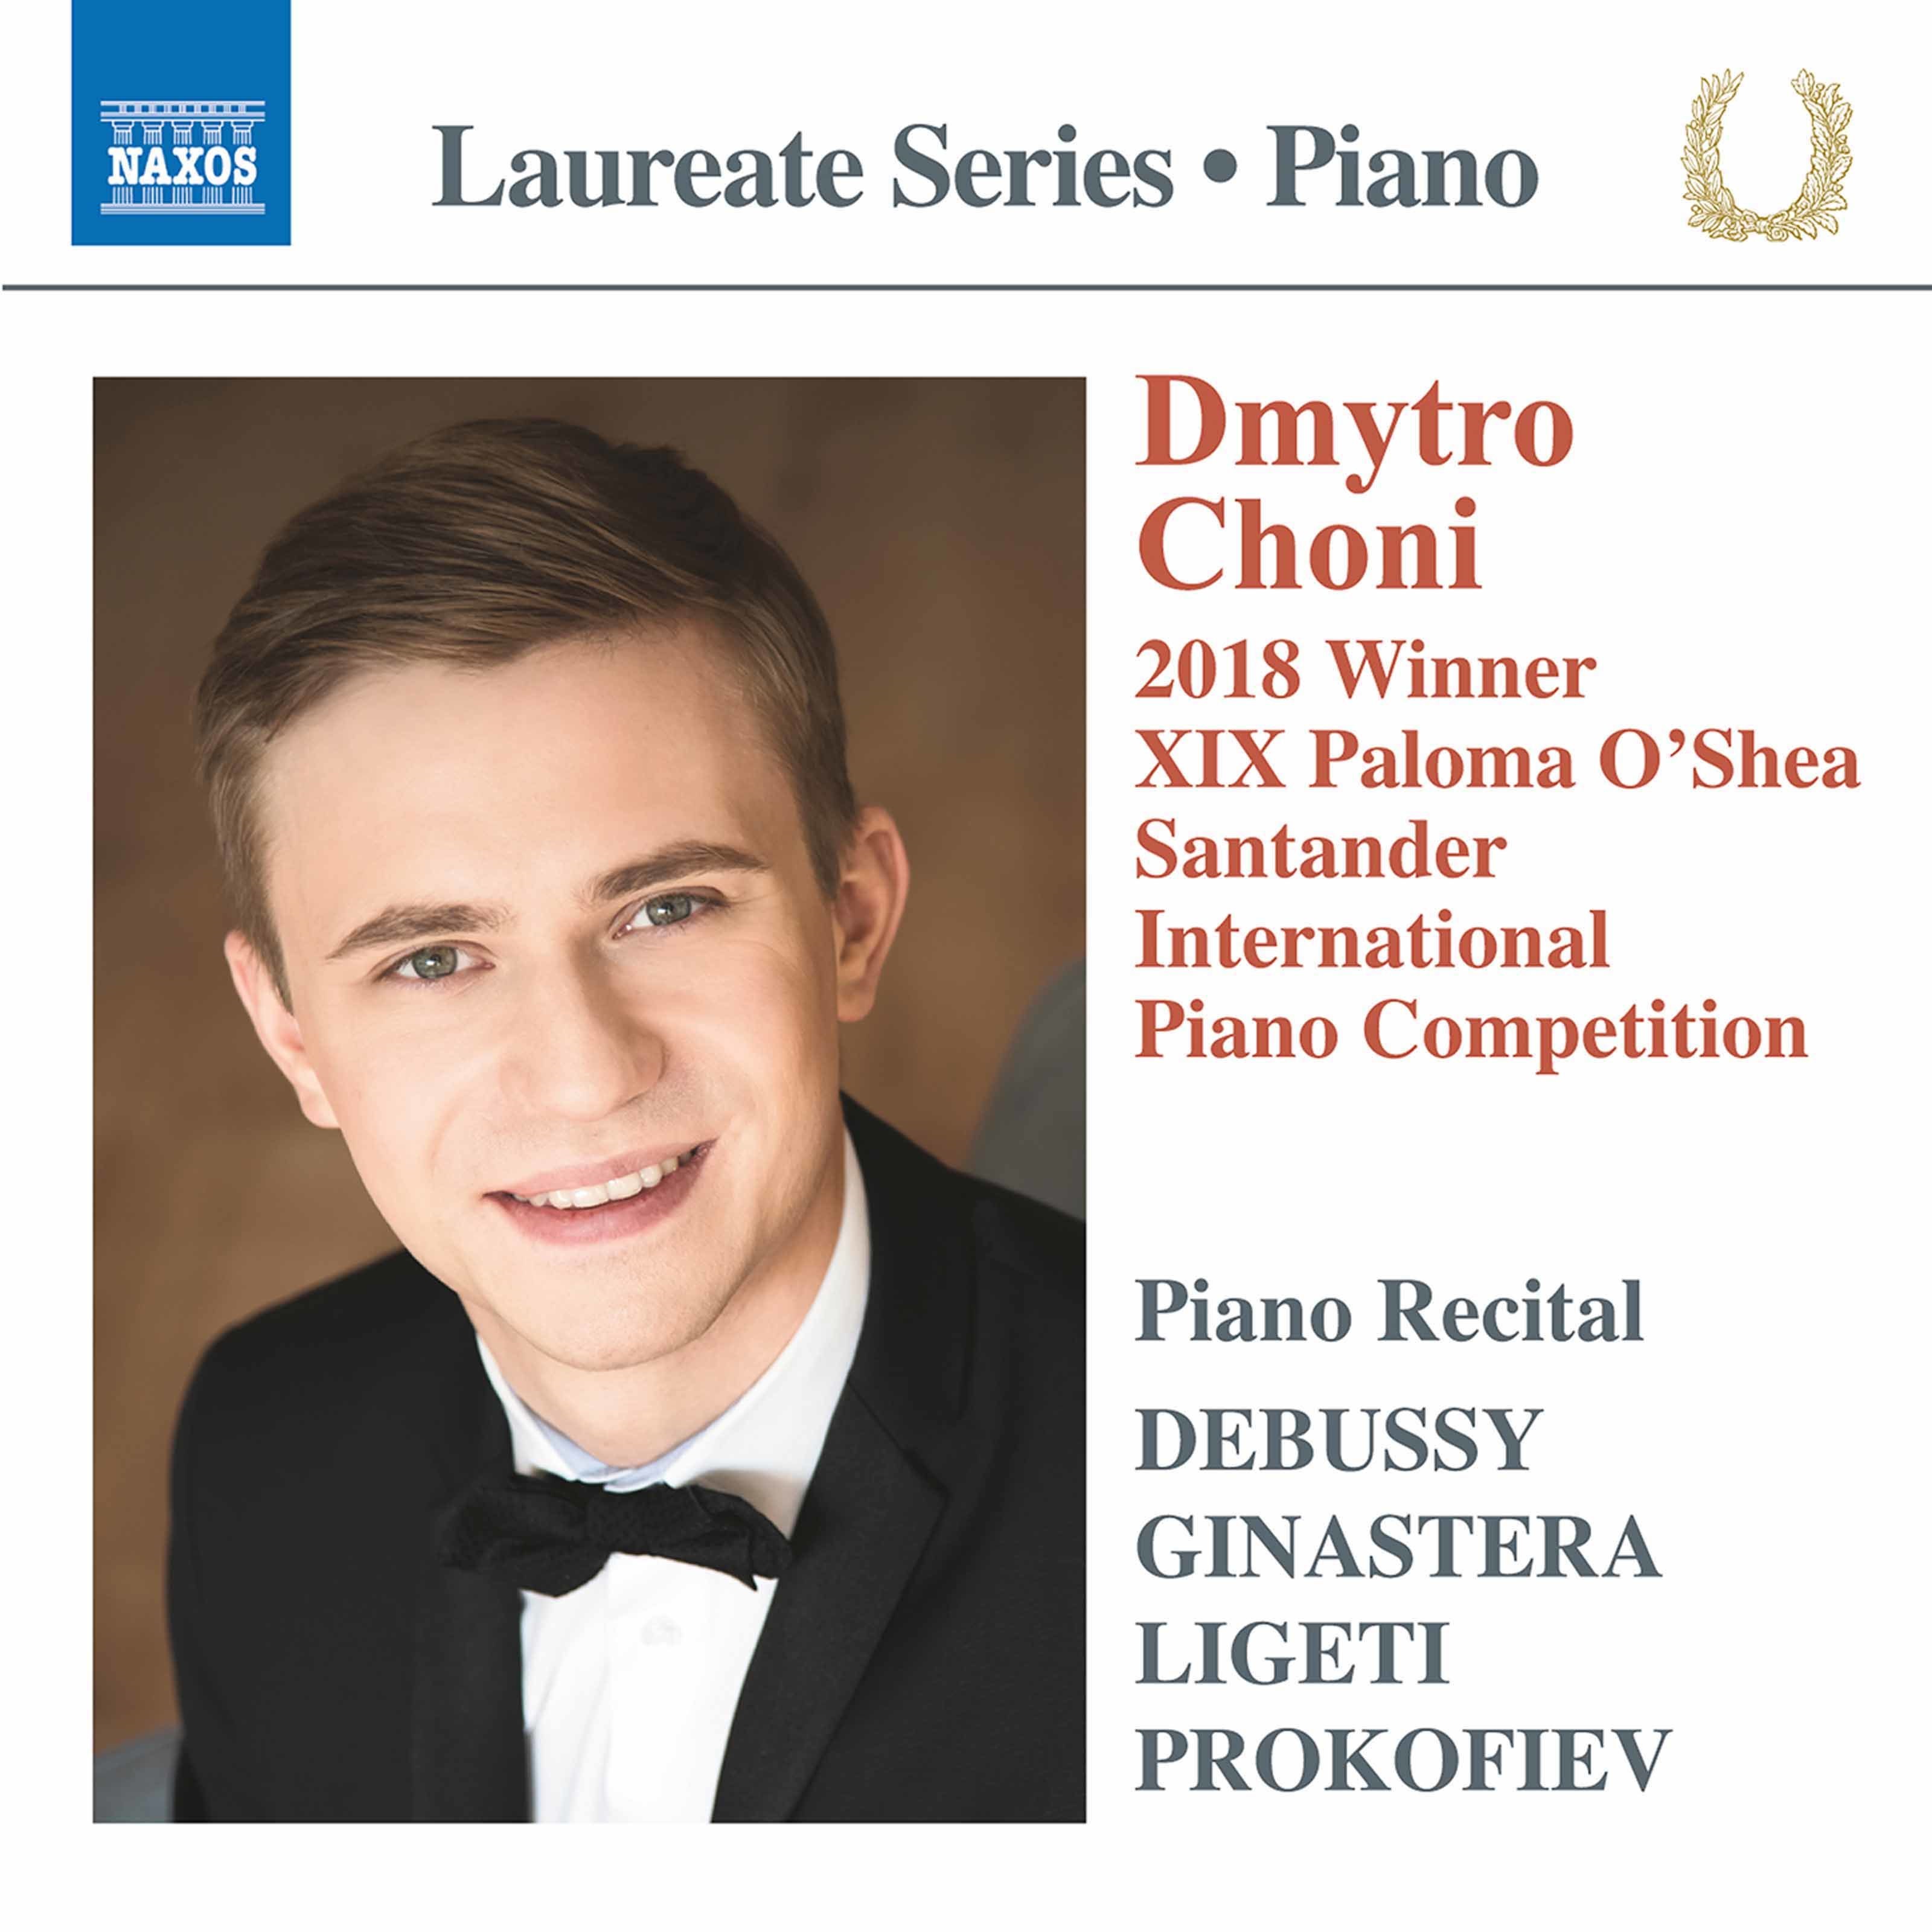 Dmytro Choni – Debussy, Ginastera & Others: Piano Works (2020) [FLAC 24bit/96kHz]